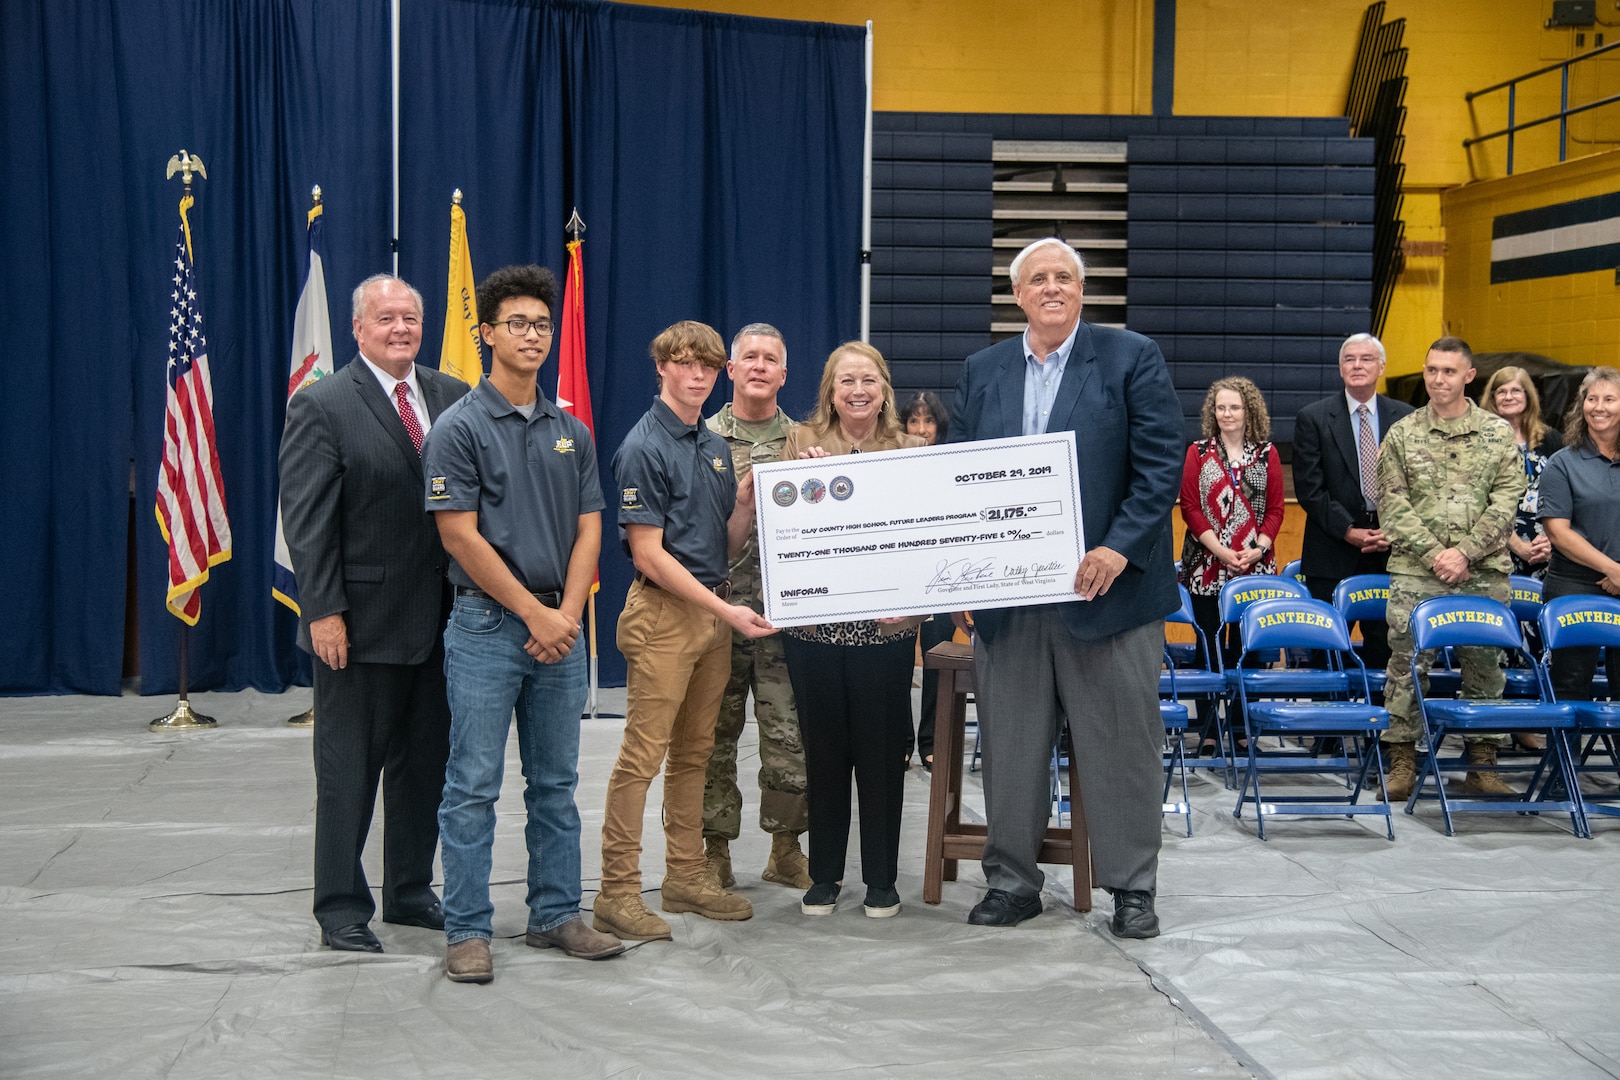 West Virginia Gov. Jim Justice and First Lady Cathy Justice, Maj. Gen. James Hoyer, West Virginia Adjutant General, and West Virginia State Superintendent Dr. Steven L. Paine present a ceremonial check to two West Virginia National Guard (WVNG) Future Leaders Program (FLP) students that will be used to help fund their program after a ceremony at Clay County High School Oct. 29, 2019. The WVNG FLP is designed to assist high schools in providing military and leadership-based curriculum, mentorship, and guidance to high school students that aid in character and leadership development, tailored to the needs and requests of participating schools in West Virginia. (U.S. Army National Guard photo by Edwin L. Wriston)